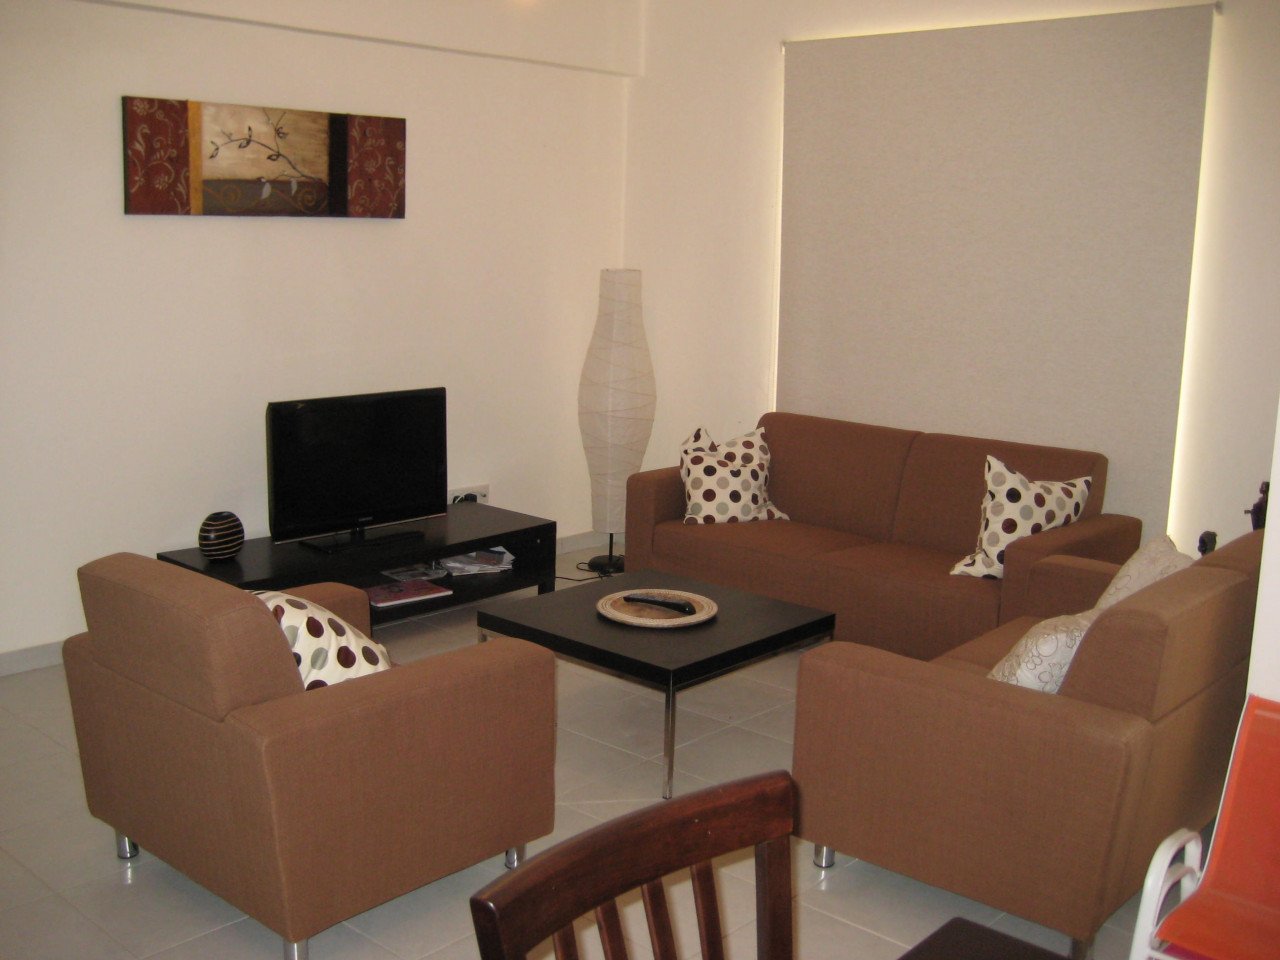 Property for Sale: Apartment (Flat) in Mazotos, Larnaca  | Key Realtor Cyprus